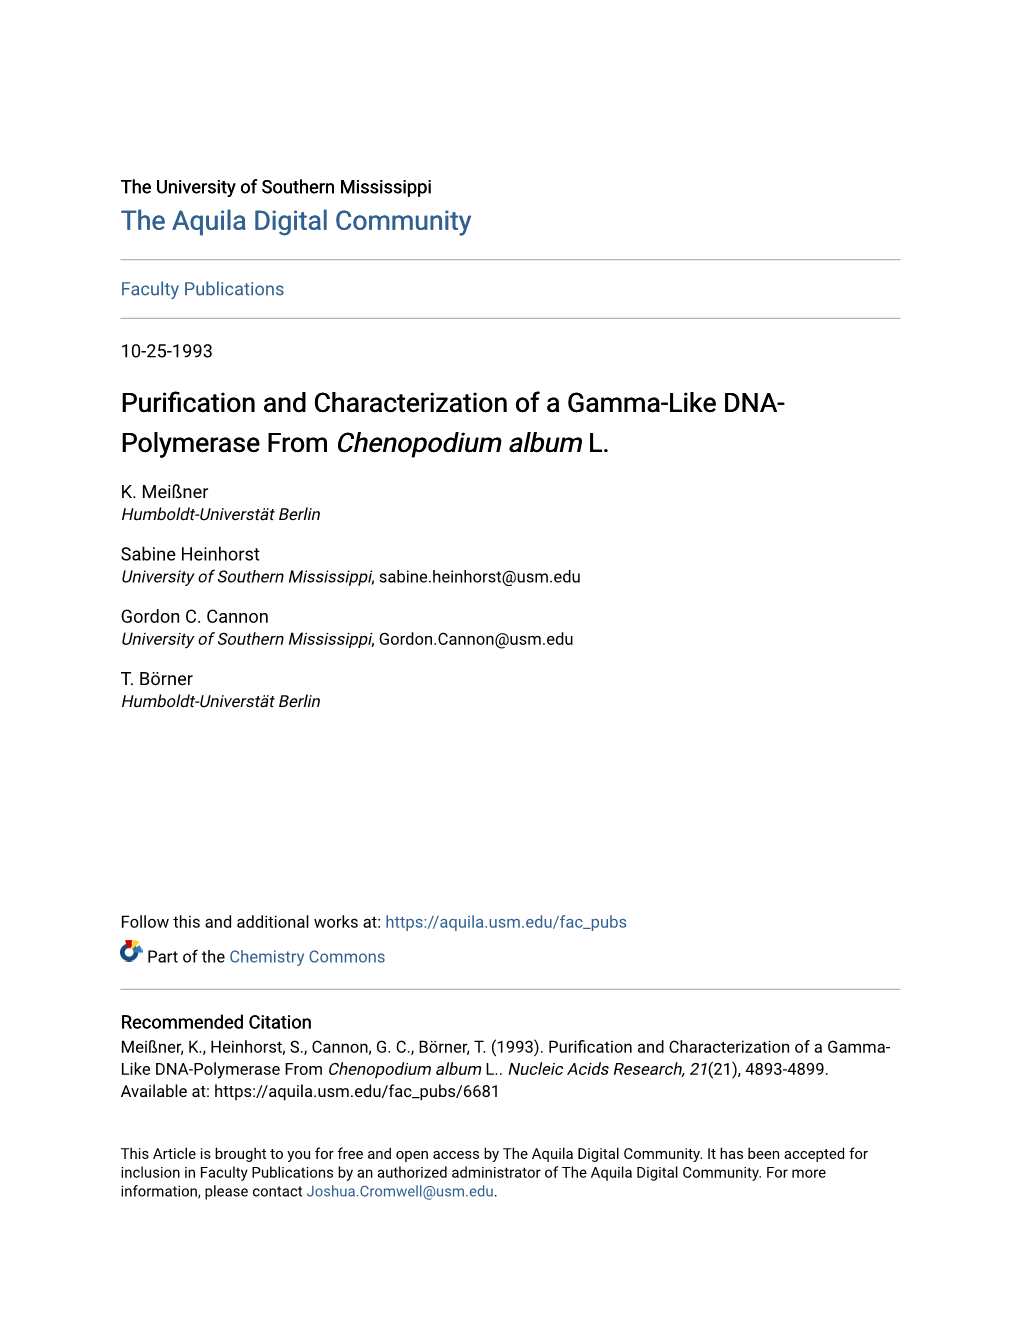 Purification and Characterization of a Gamma-Like DNA-Polymerase